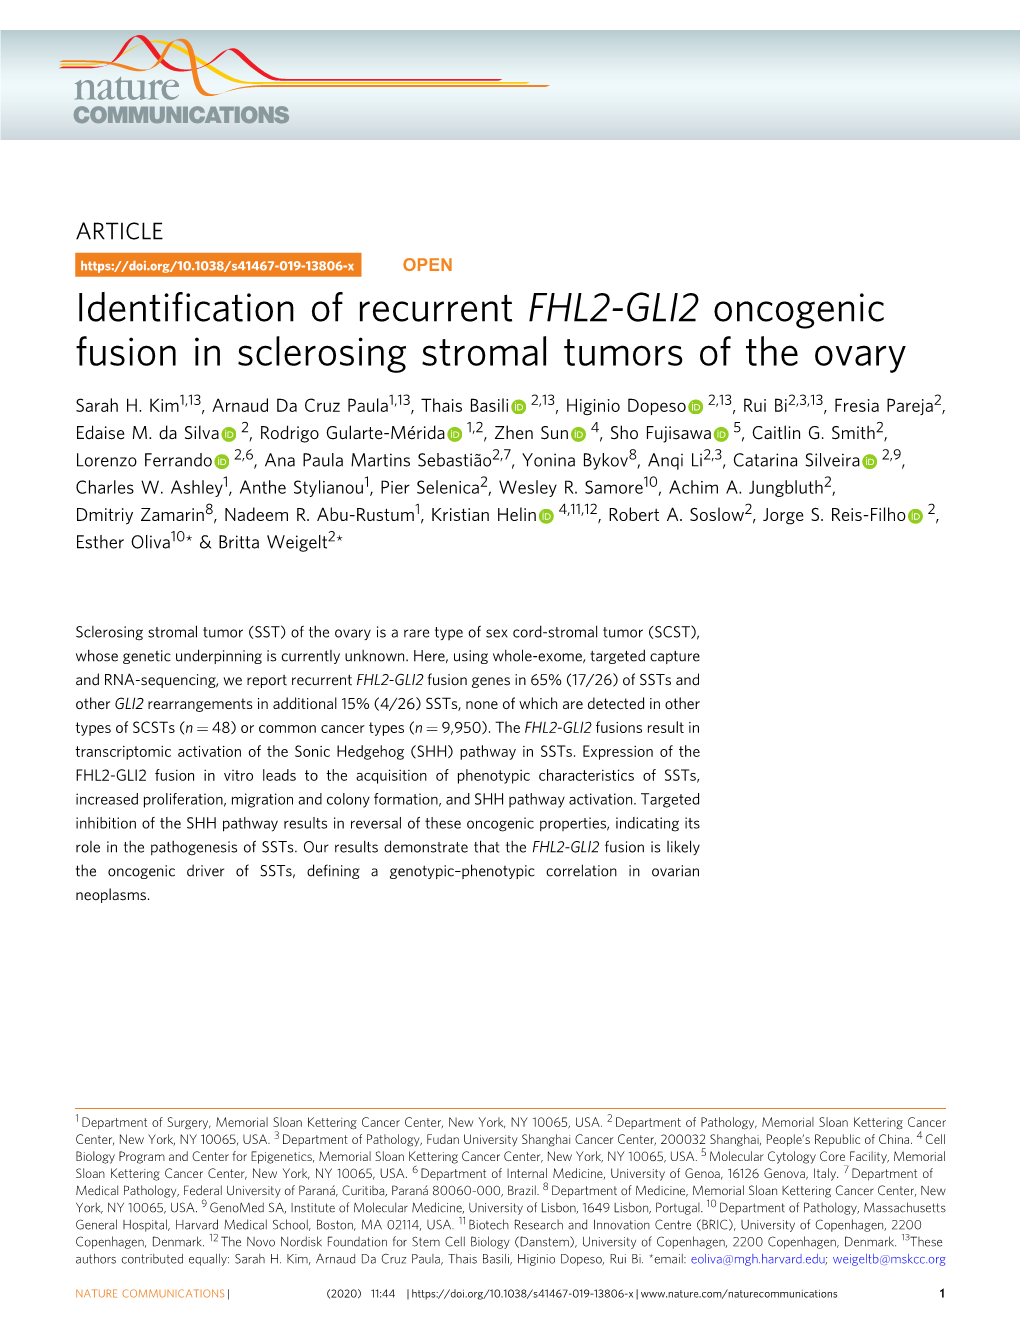 Identification of Recurrent FHL2-GLI2 Oncogenic Fusion in Sclerosing Stromal Tumors of the Ovary